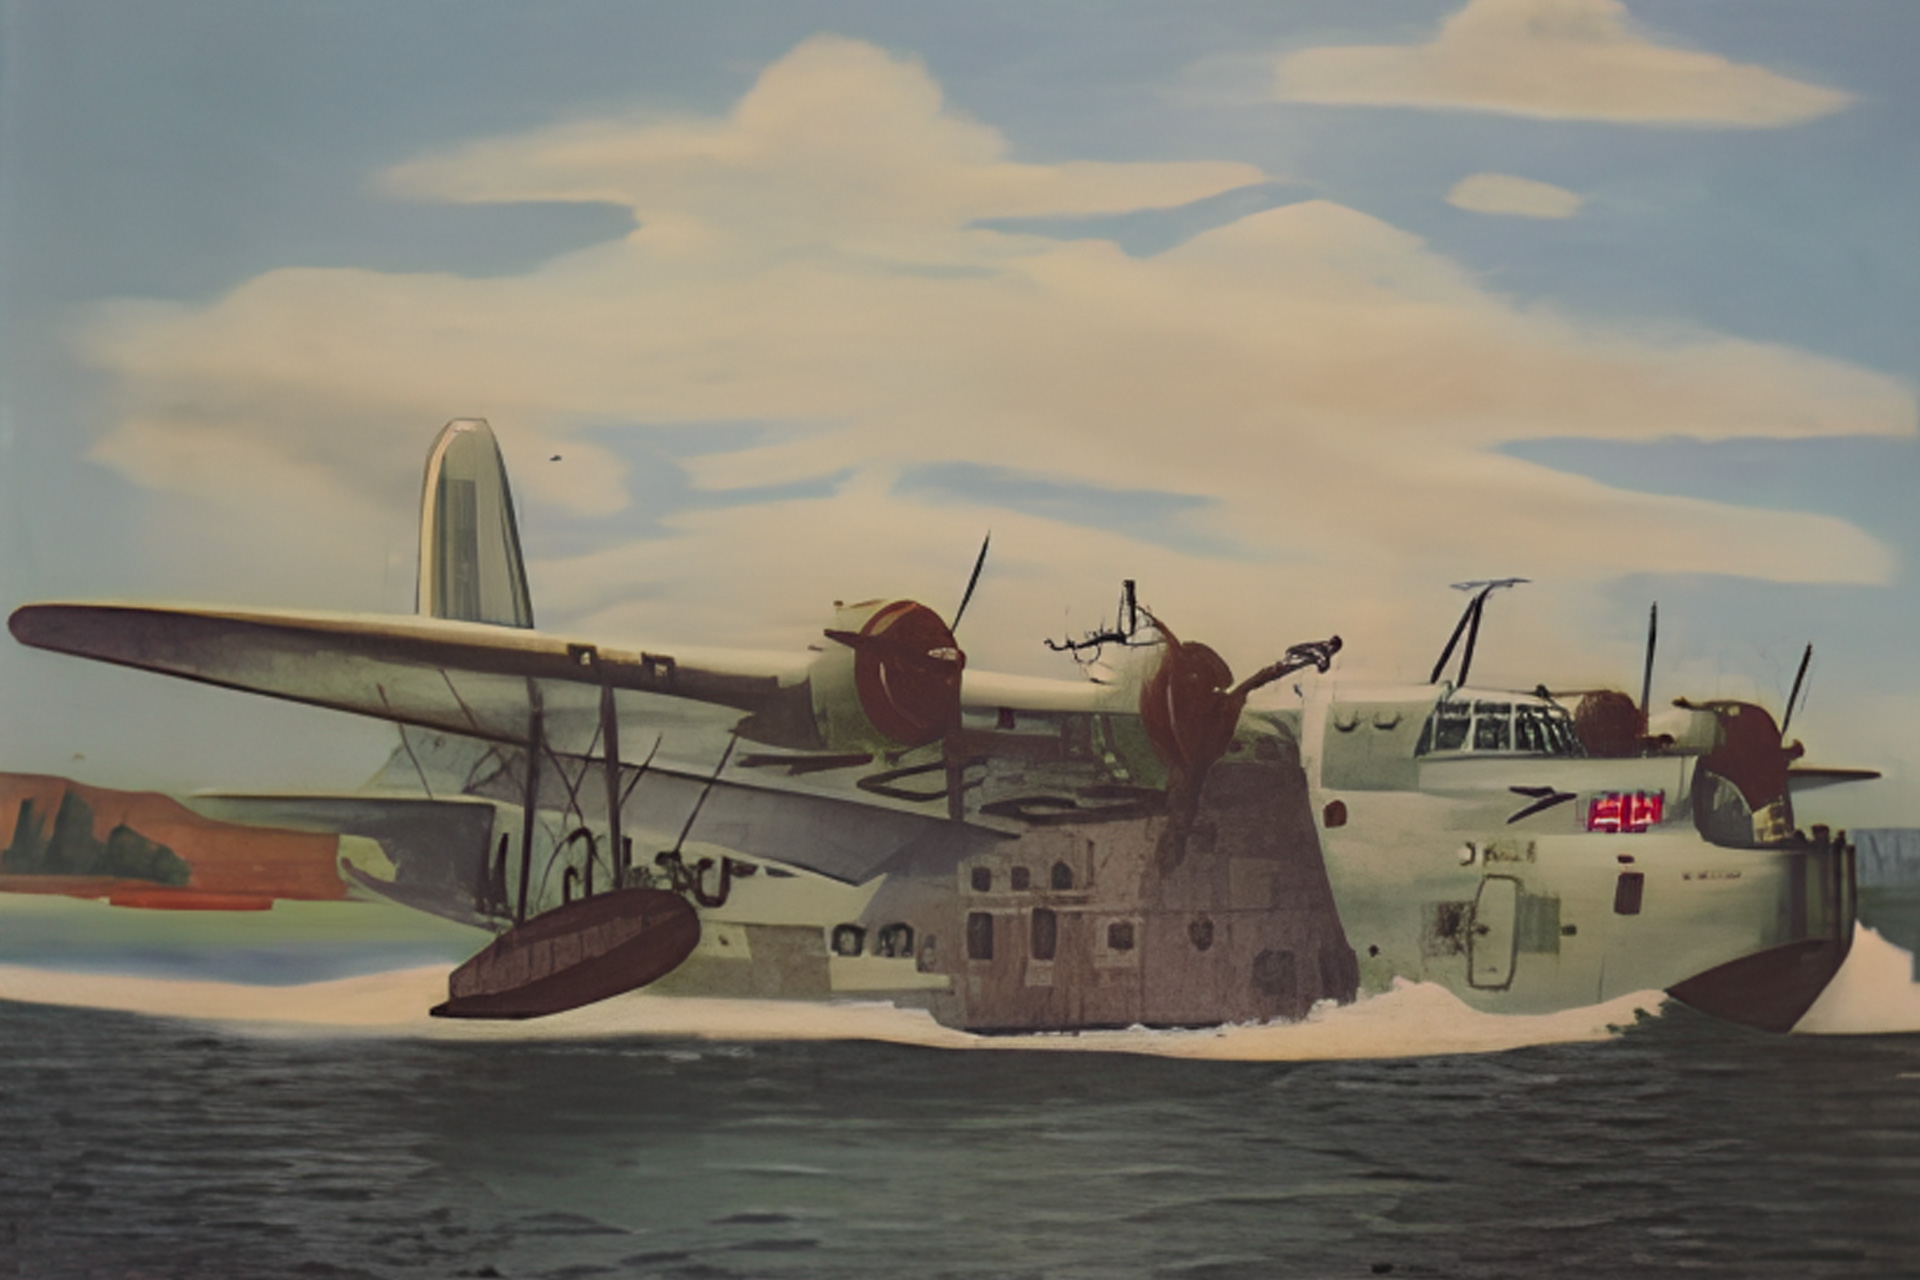 Postcard of a Hyth flying boat landing or taking off from water. Colour illustration